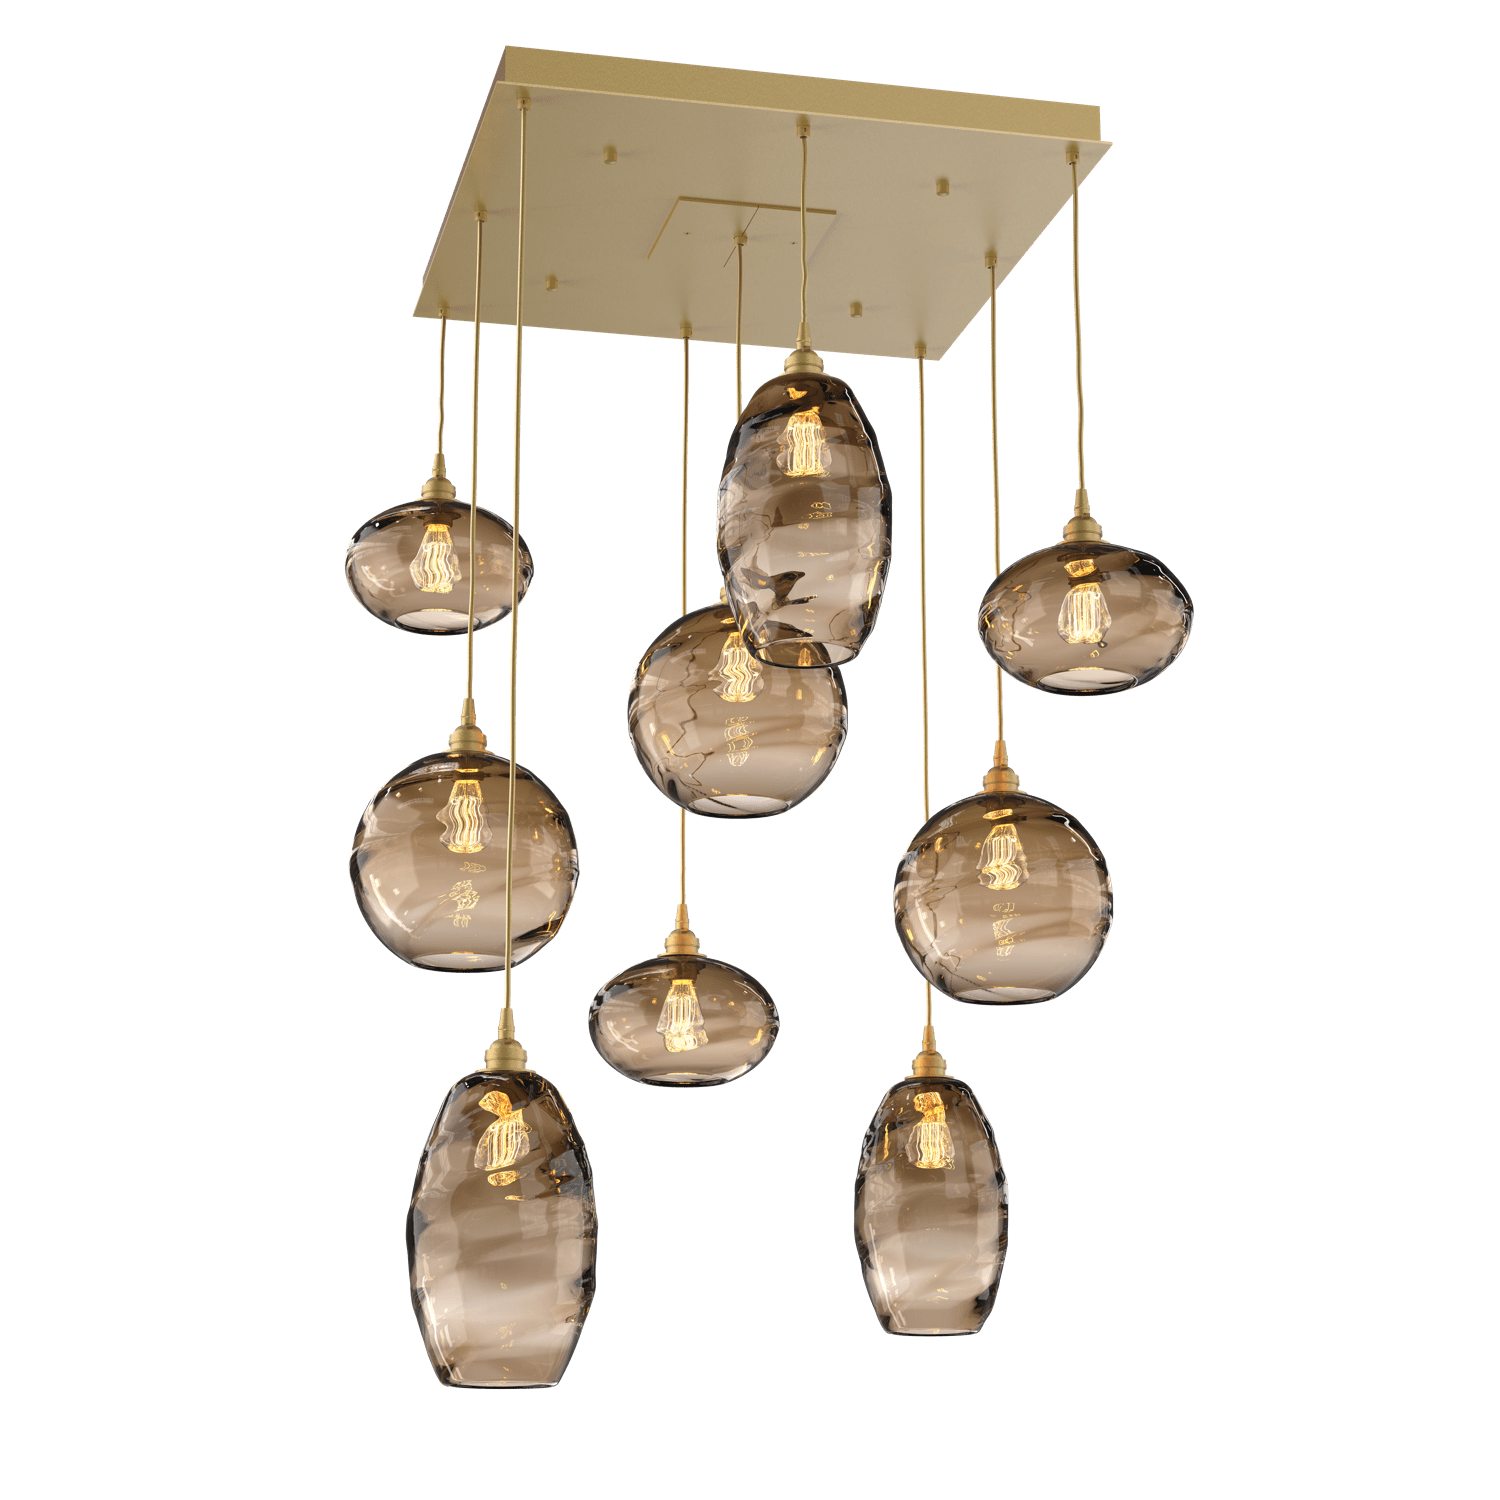 CHB0048-09-GB-OB-Hammerton-Studio-Optic-Blown-Glass-Misto-9-light-square-pendant-chandelier-with-gilded-brass-finish-and-optic-bronze-blown-glass-shades-and-incandescent-lamping